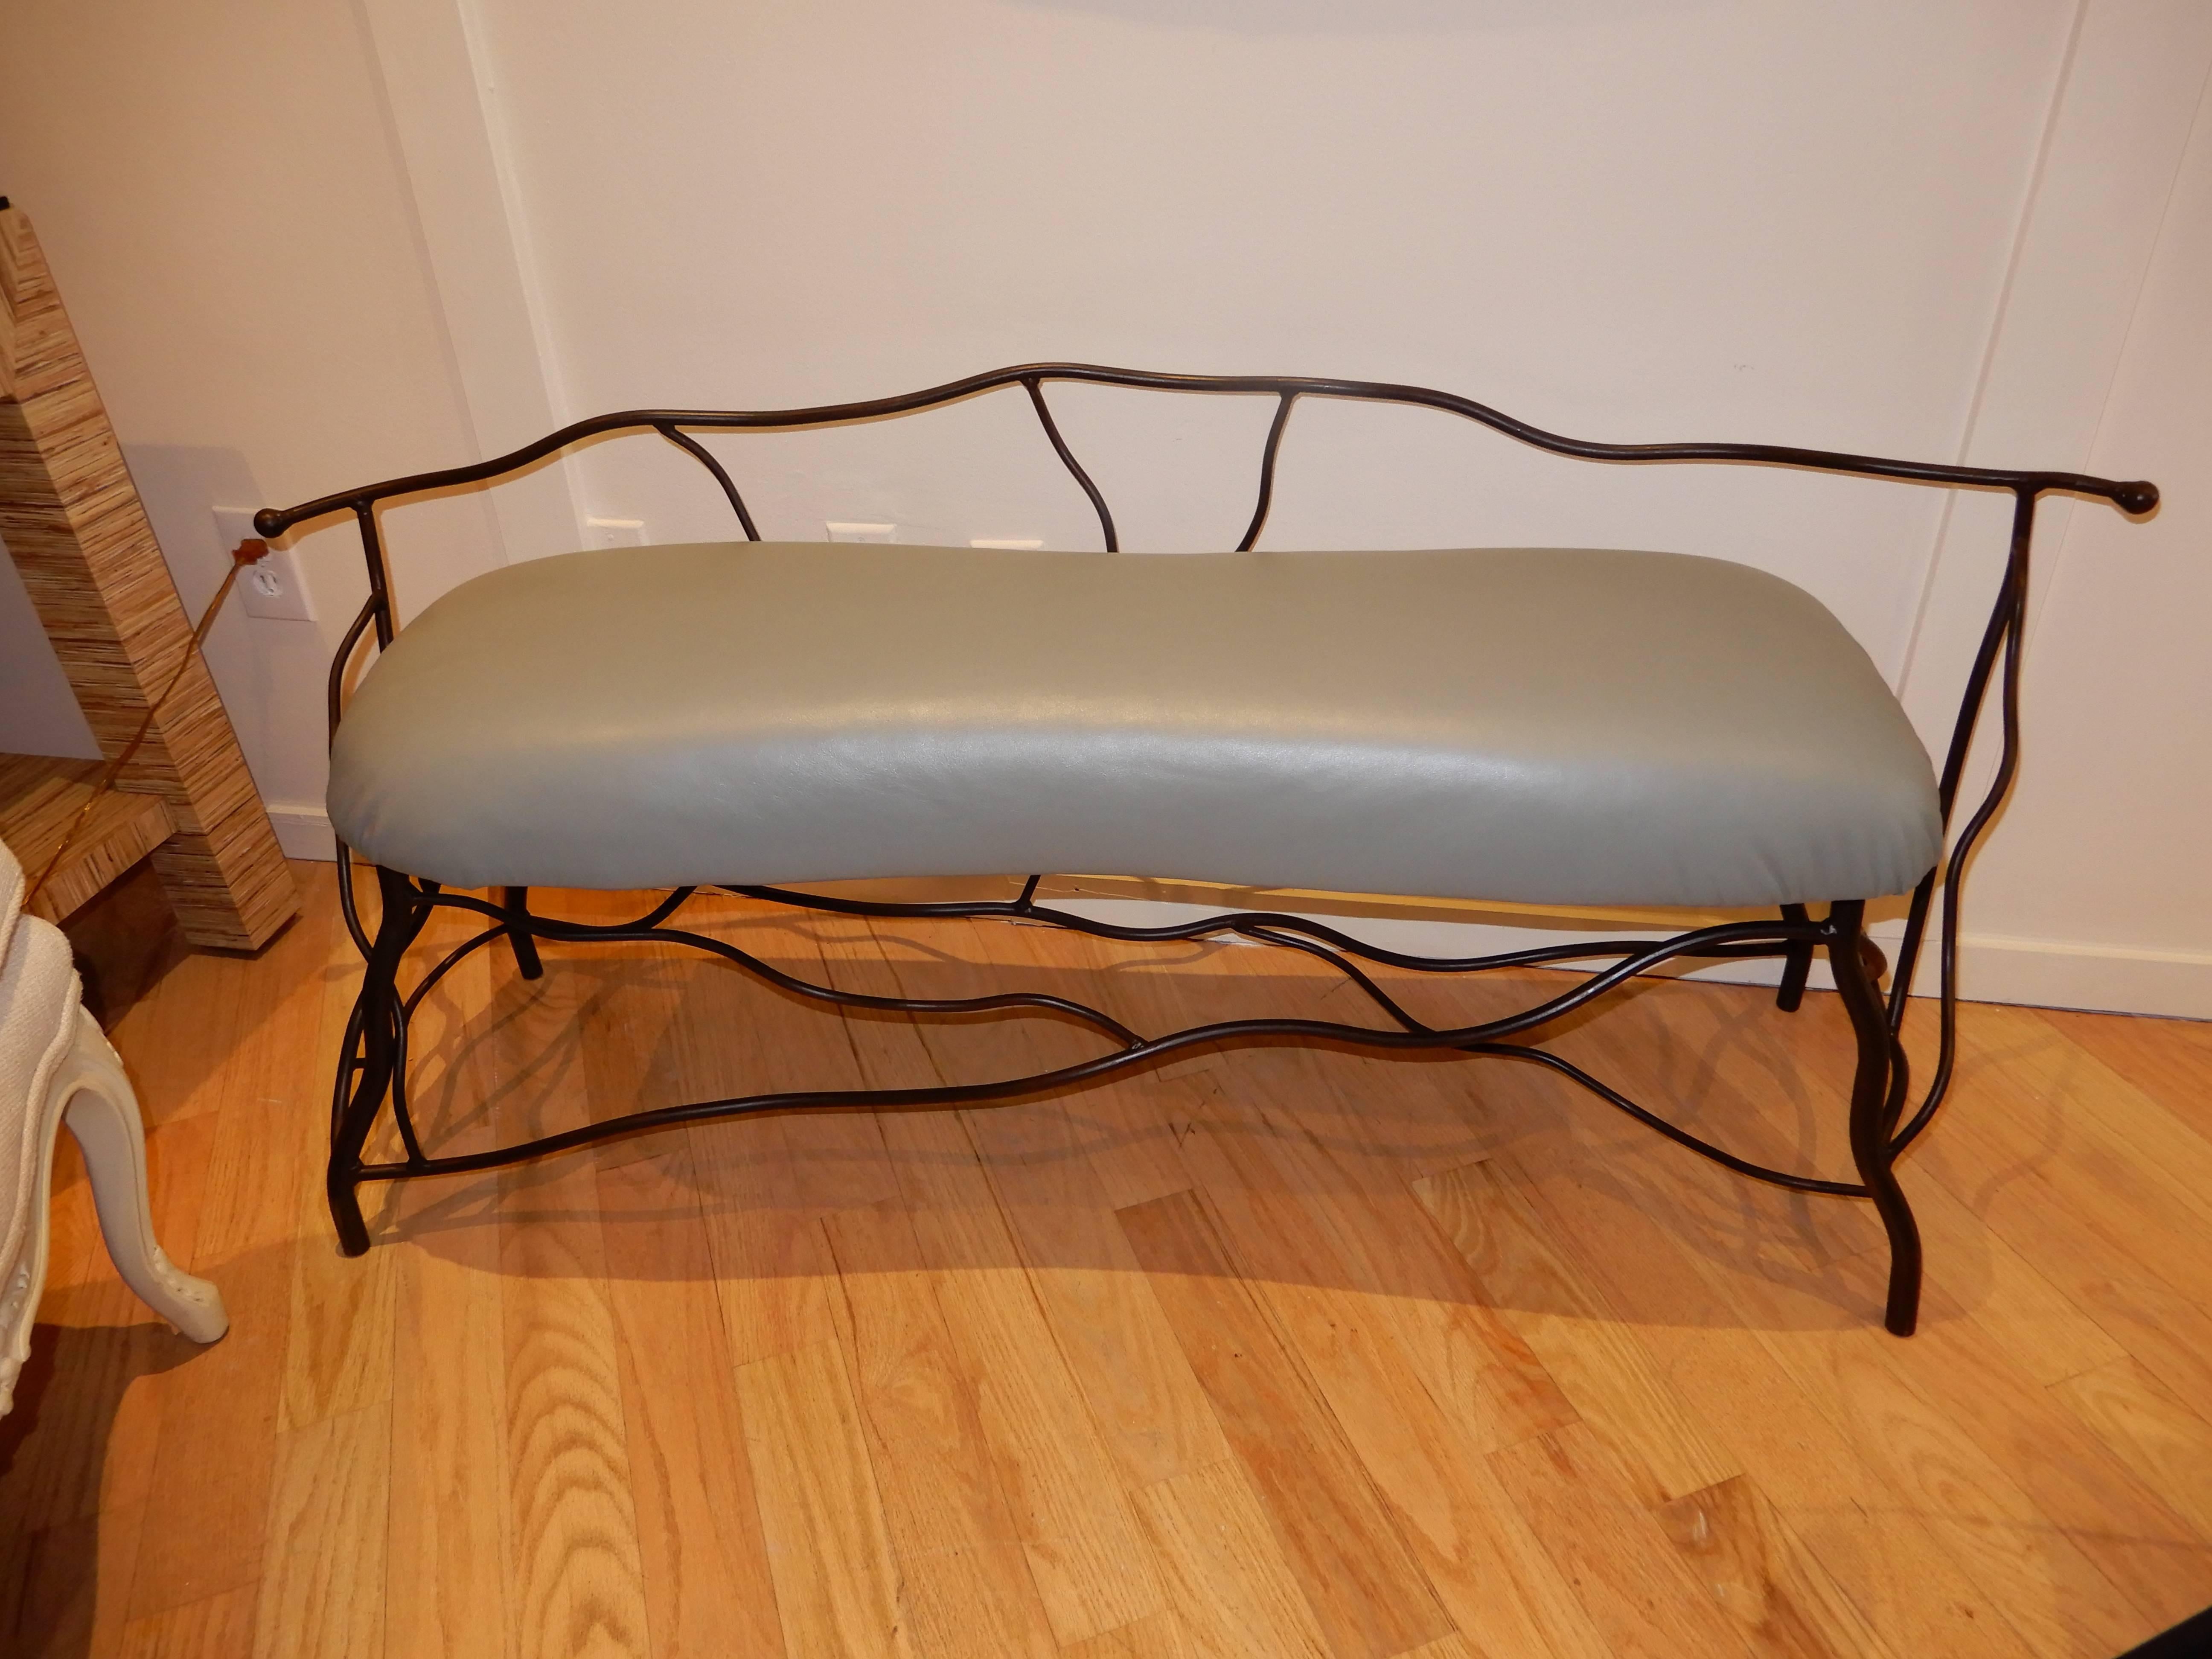 Studio Crafted Giacometti Style Sculptural Iron and Leather Bench 1